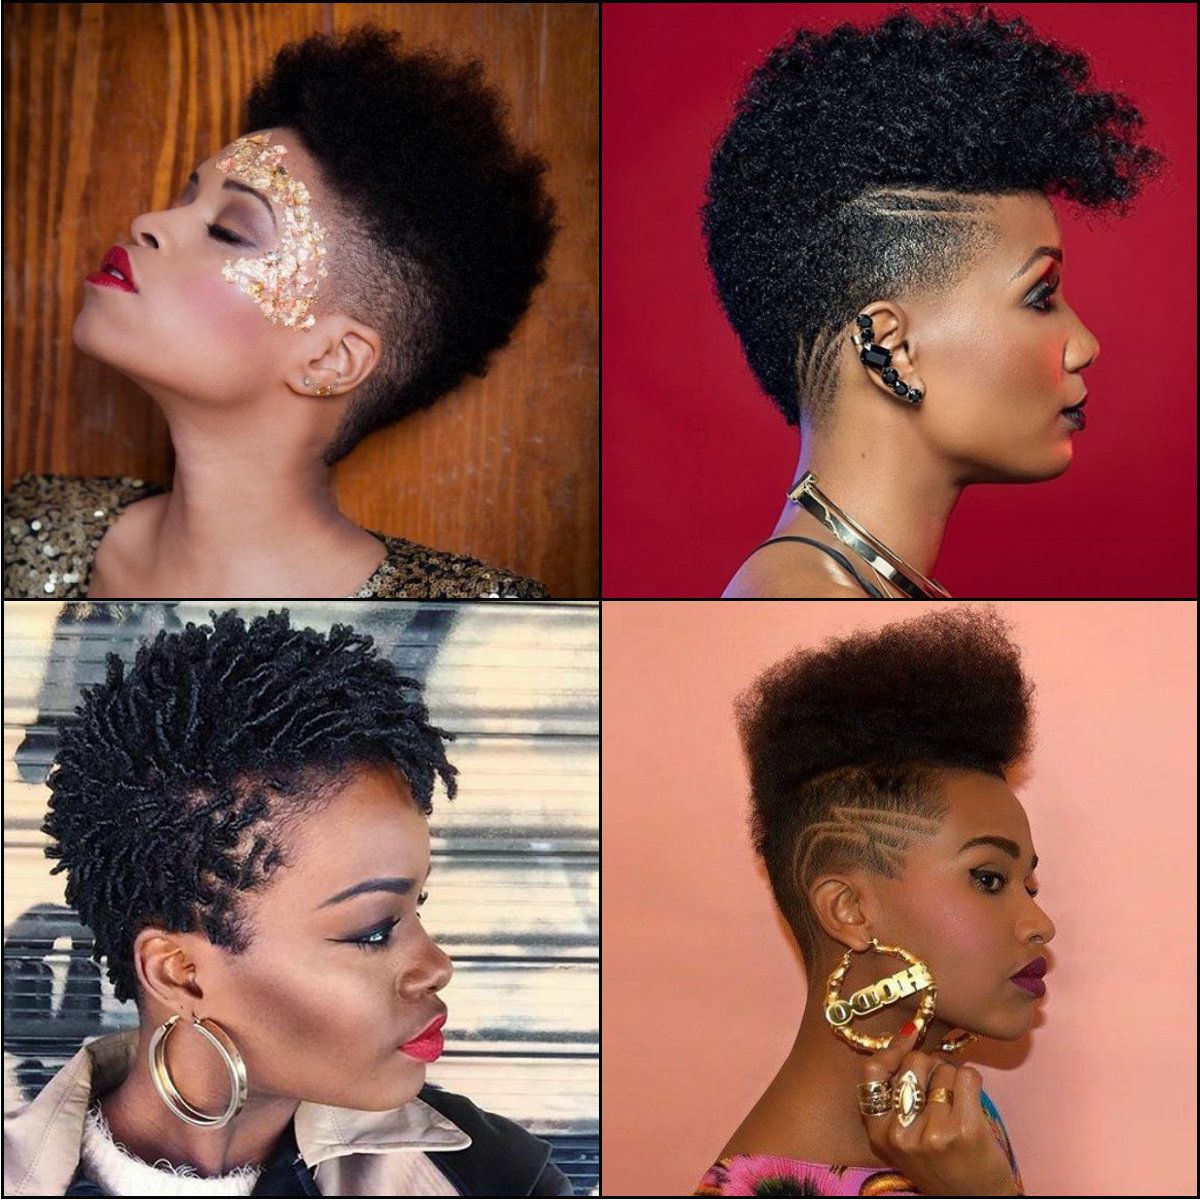 Black Women Fade Haircuts To Look Edgy And Sexy | Hairstyles 2017 Regarding Short Edgy Haircuts For Girls (View 14 of 25)